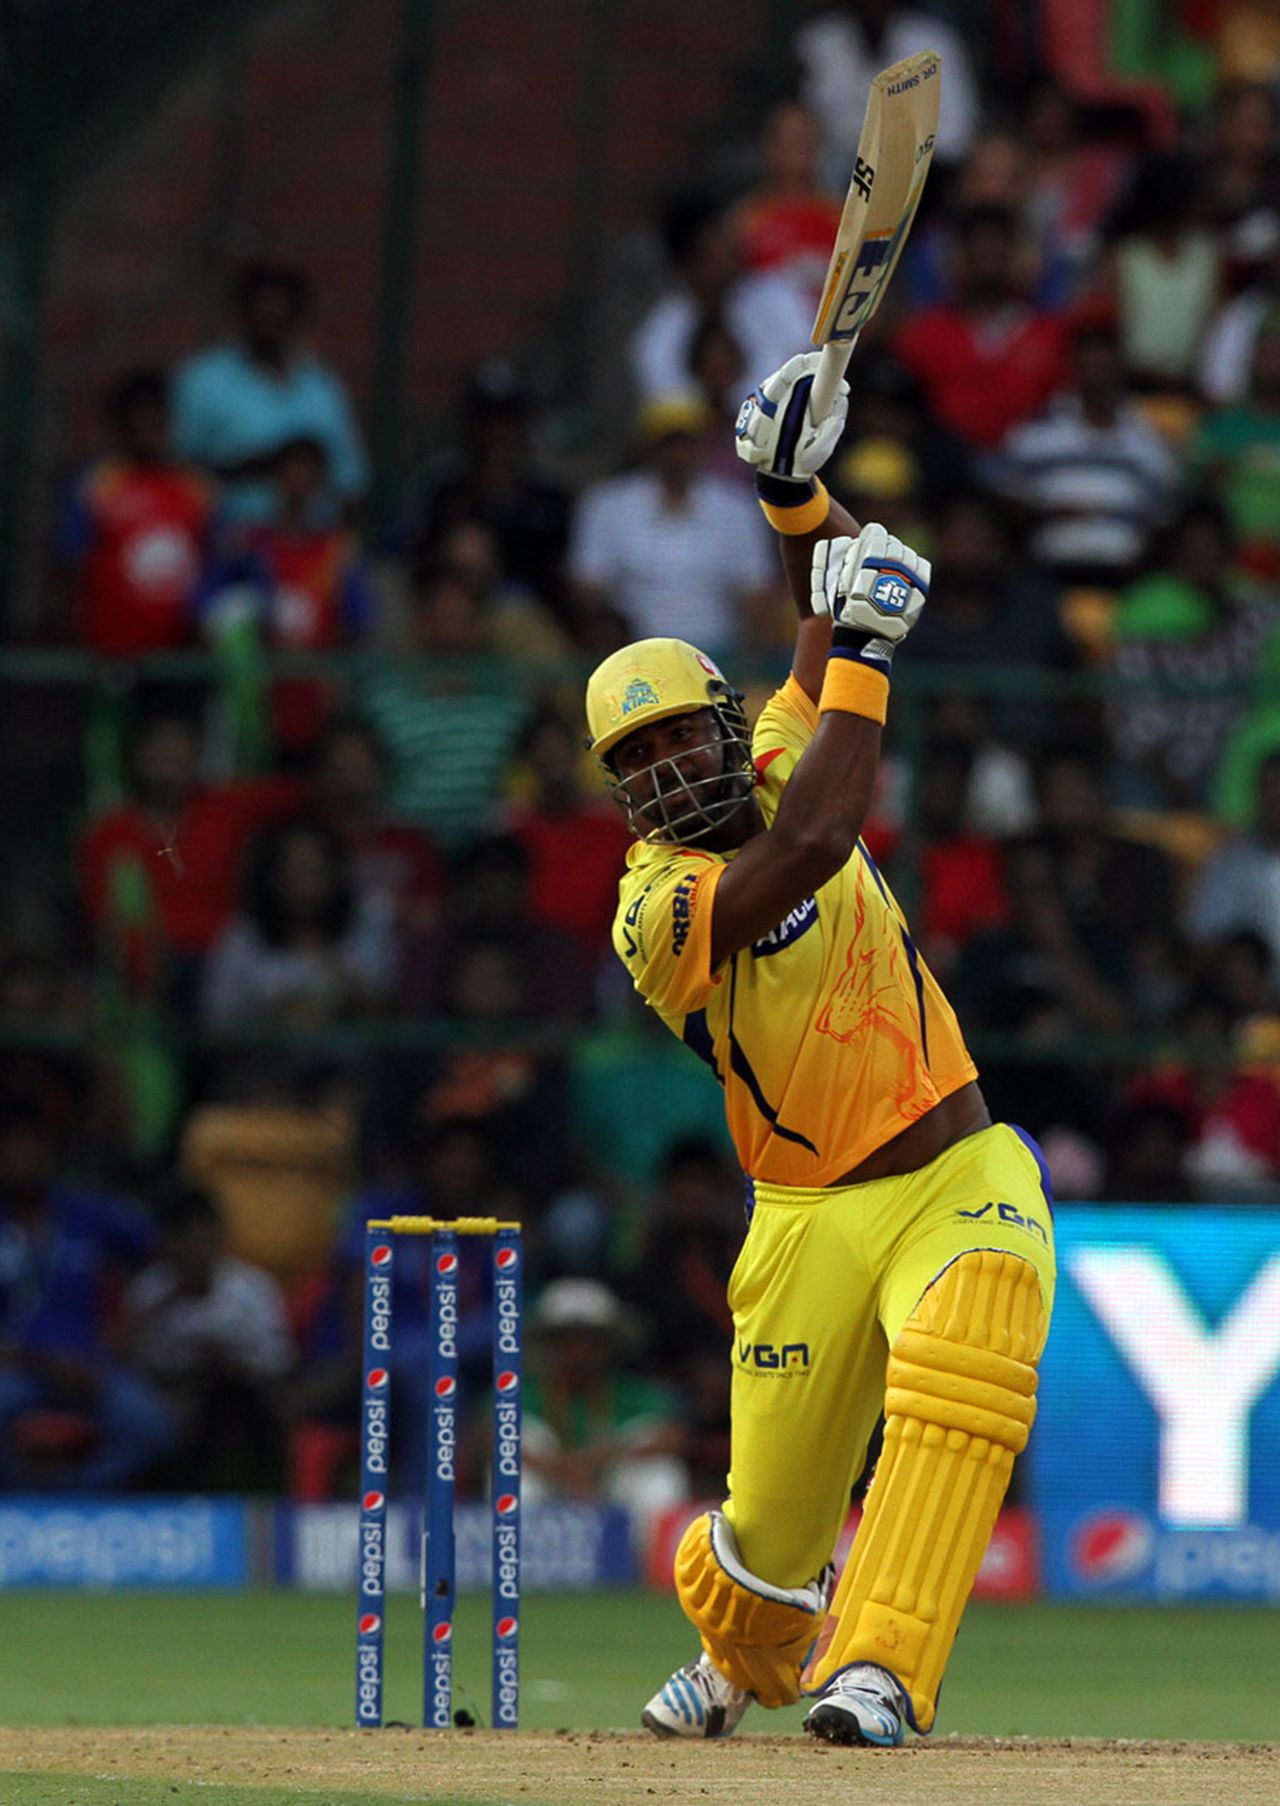 Dwayne Smith hits a one-handed drive over the top, Royal Challengers Bangalore v Chennai Super Kings, IPL 2014, Bangalore, May 24, 2014